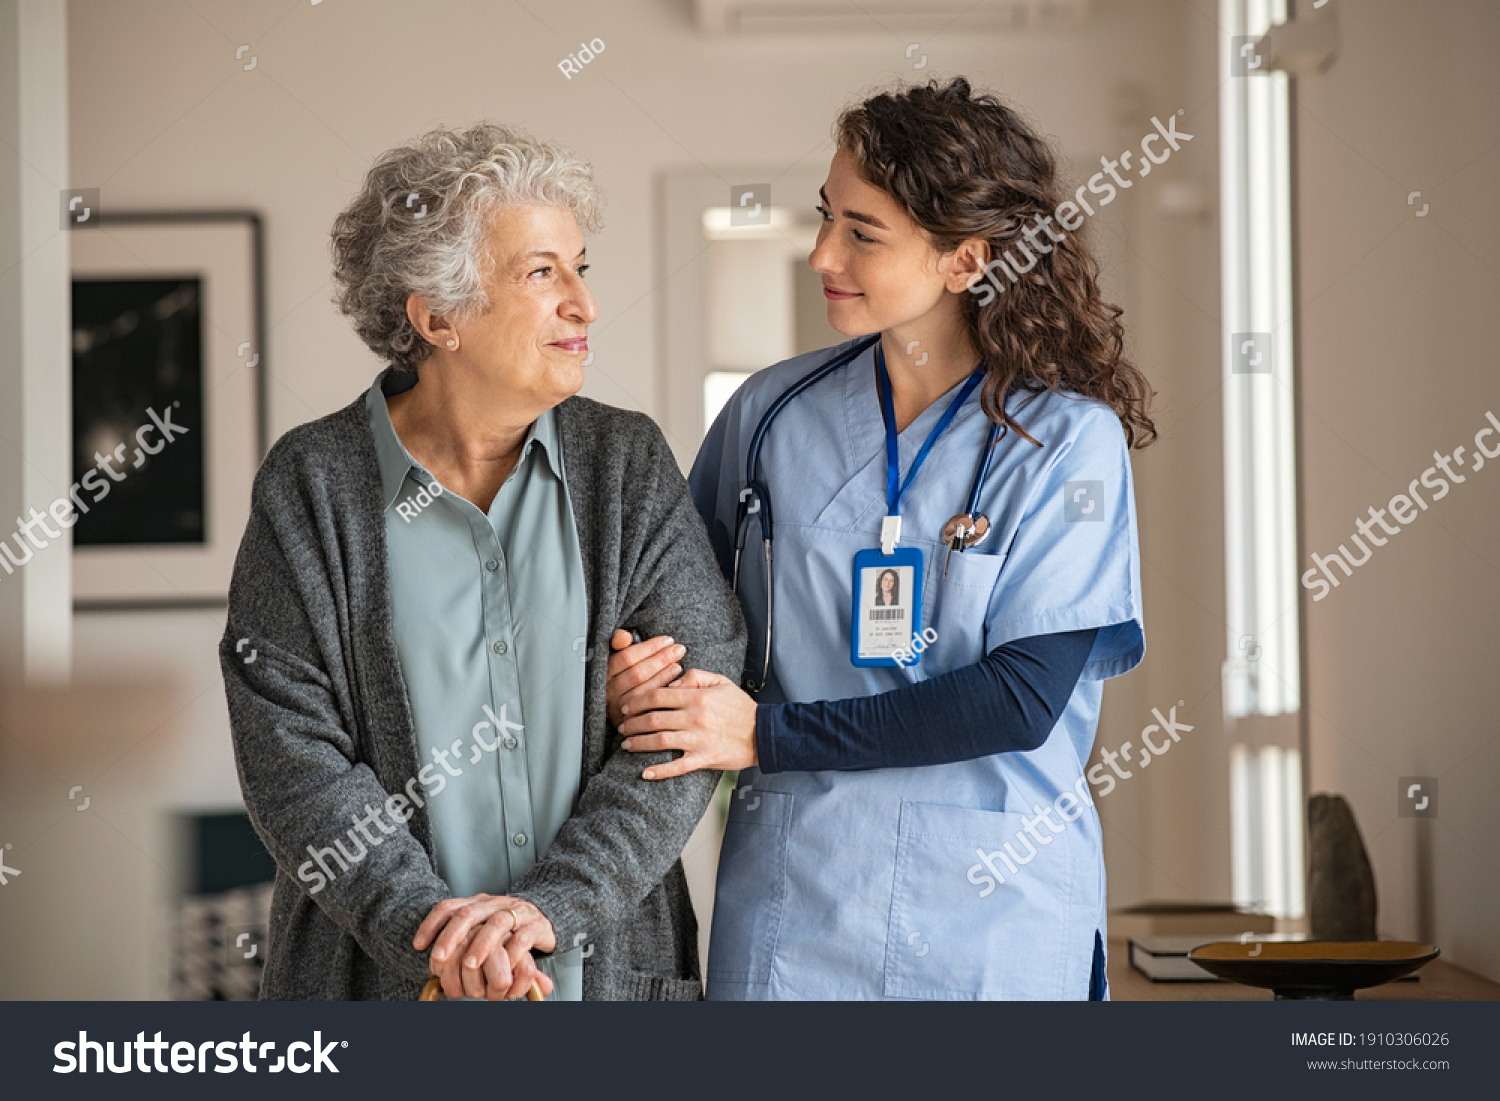 Young caregiver helping senior woman walking. Nurse assisting her old woman patient at nursing home. Senior woman with walking stick being helped by nurse at home. #1910306026